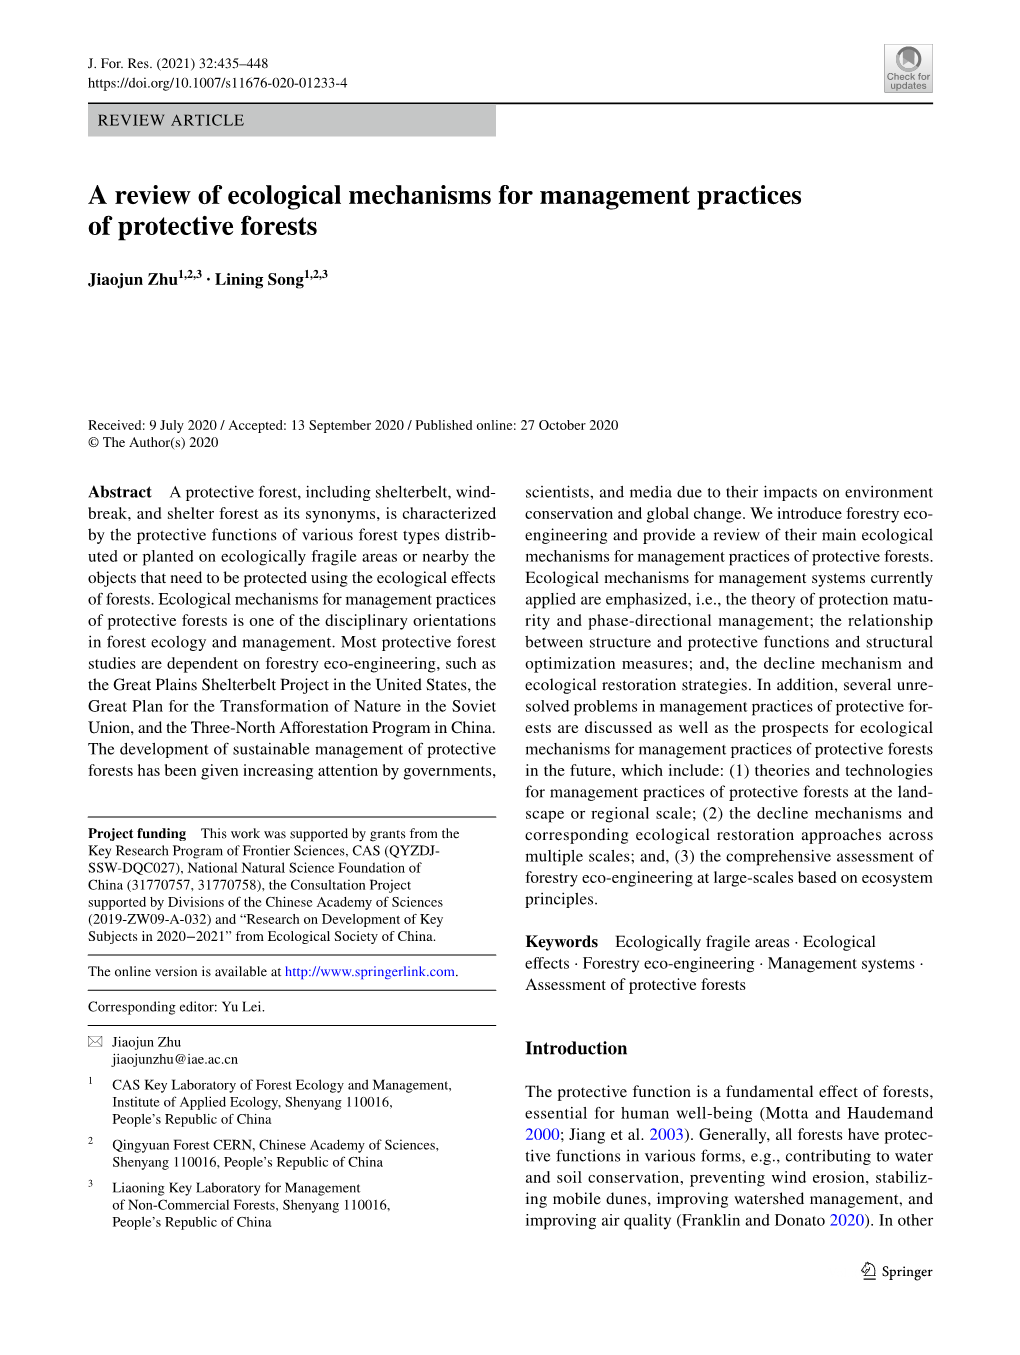 A Review of Ecological Mechanisms for Management Practices of Protective Forests